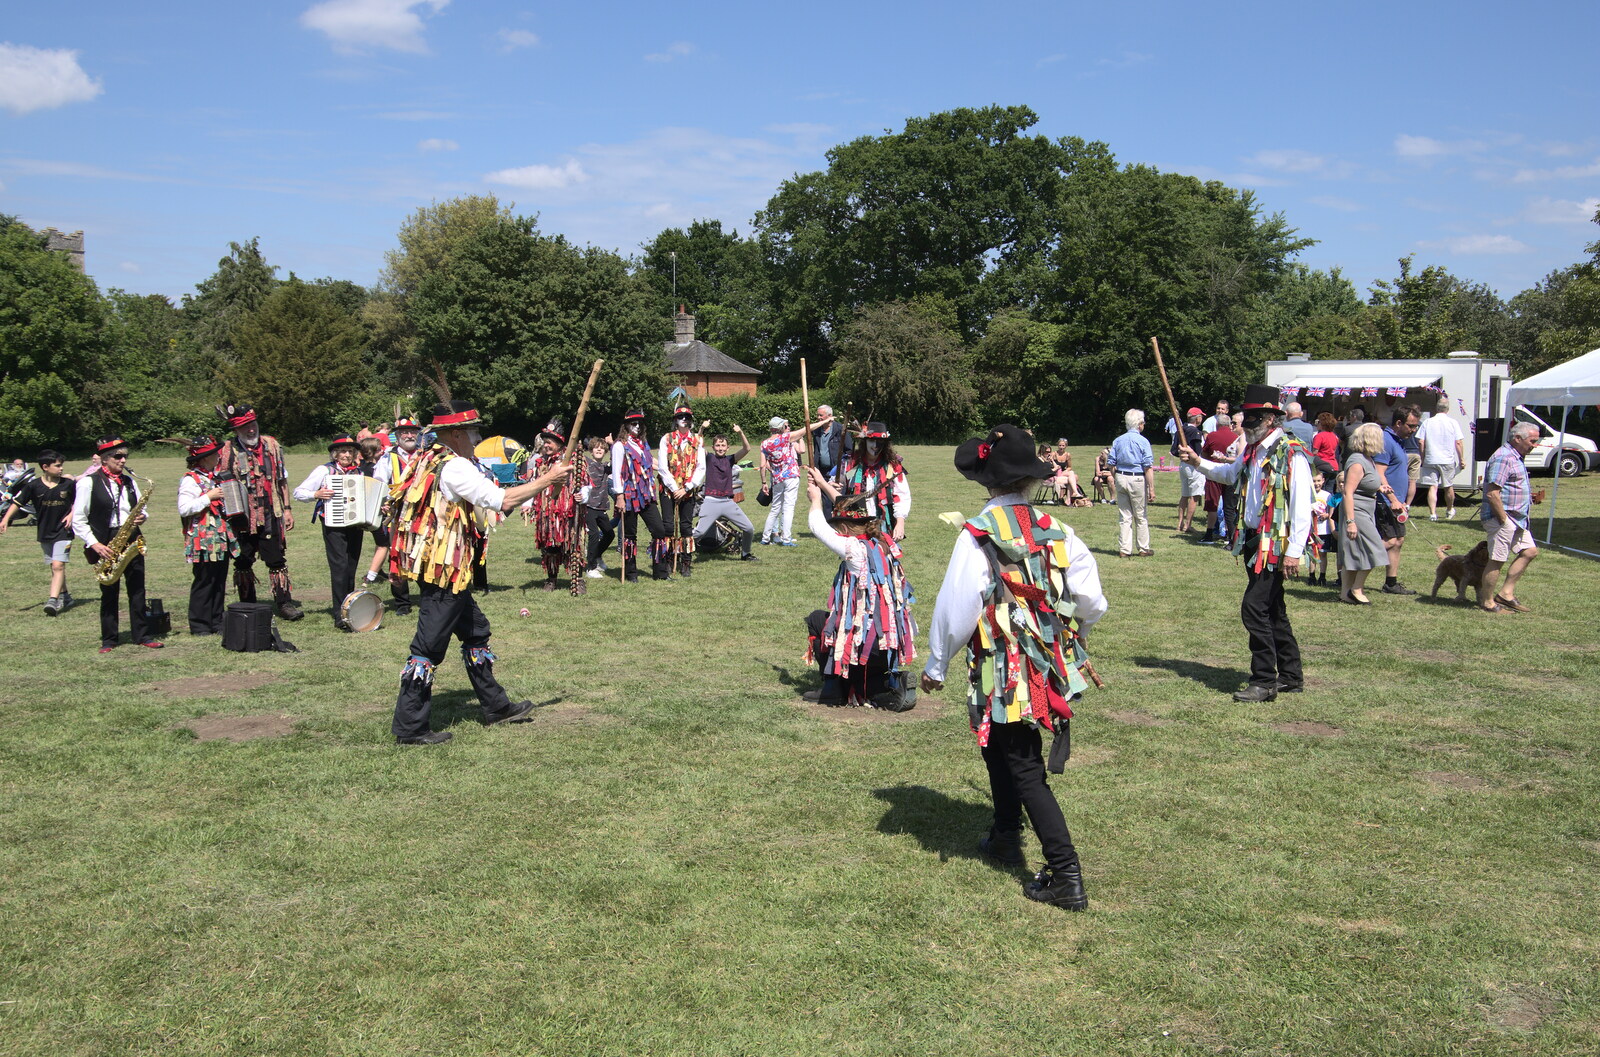 Morris dancing on the playing field from The Gislingham Silver Band at Barningham, Suffolk - 3rd June 2022